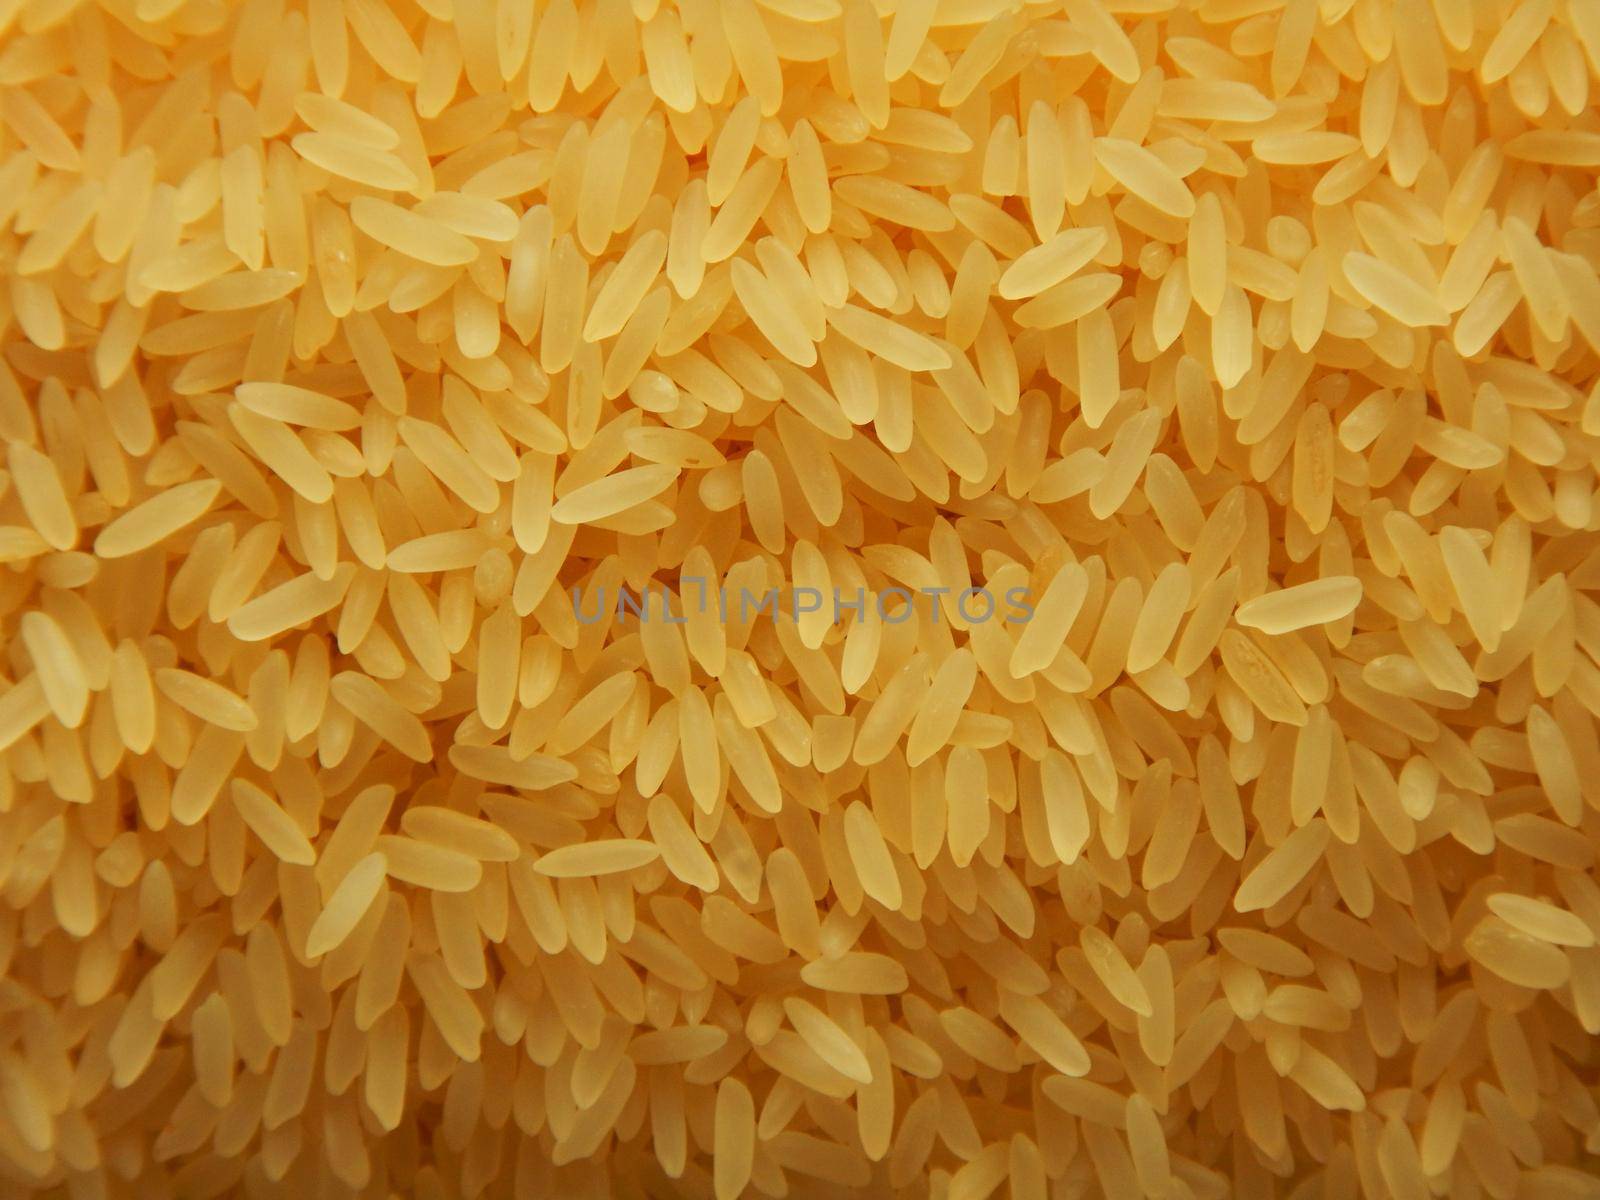 Background made with grains of rice